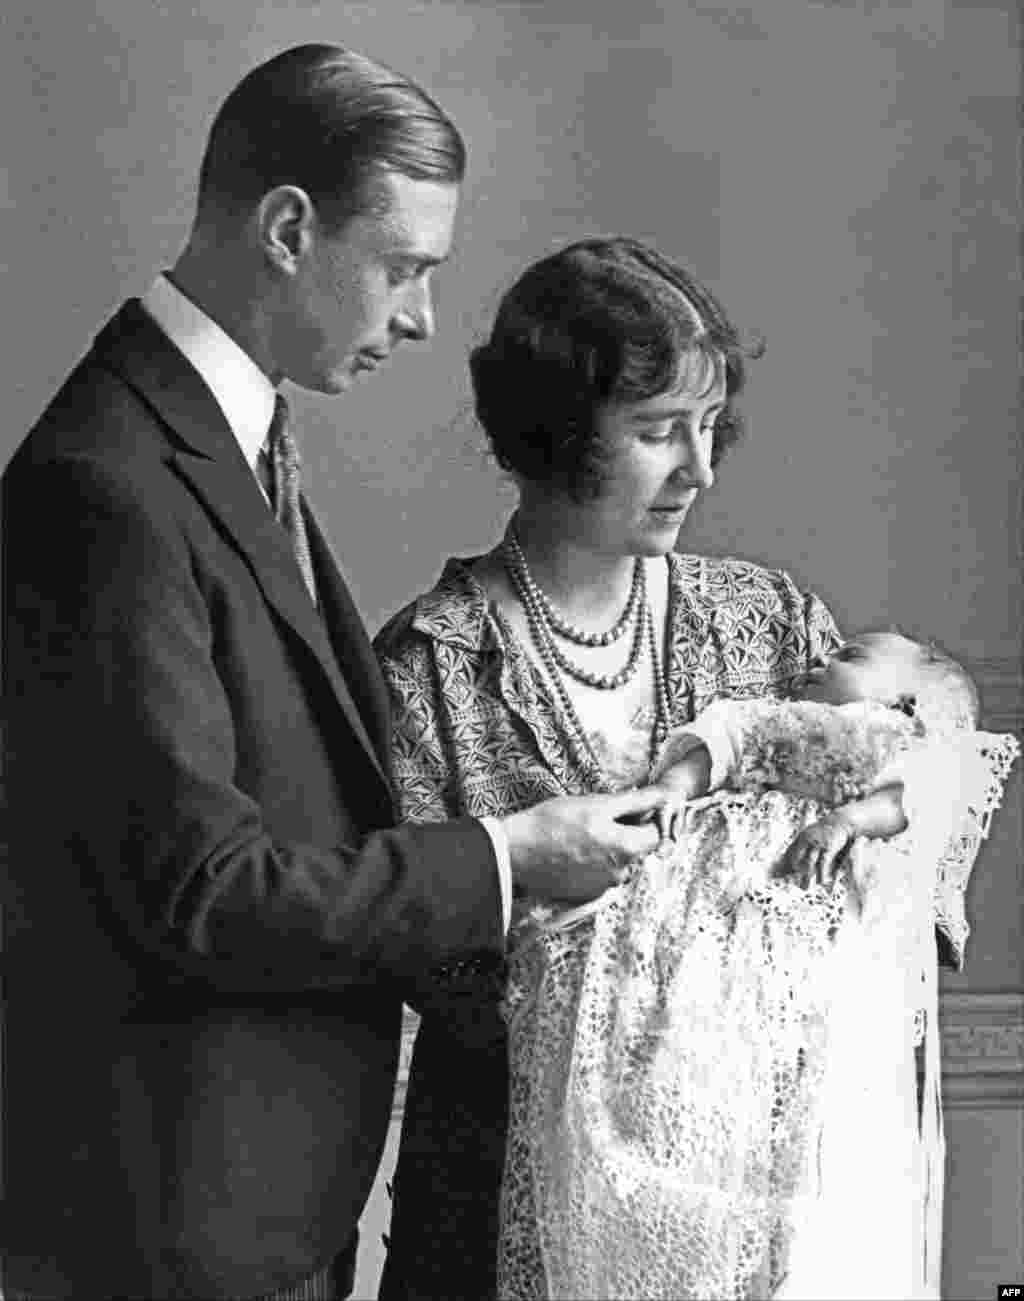 Lady Elizabeth Angela Marguerite Bowes-Lyon, the daughter of the 14th Earl of Strathmore, the Duchess of York (R) holds in 1926 in London her firstborn, Princess Elizabeth under the loving gaze of her husband, the Duke of York. She was born on April 21, 1